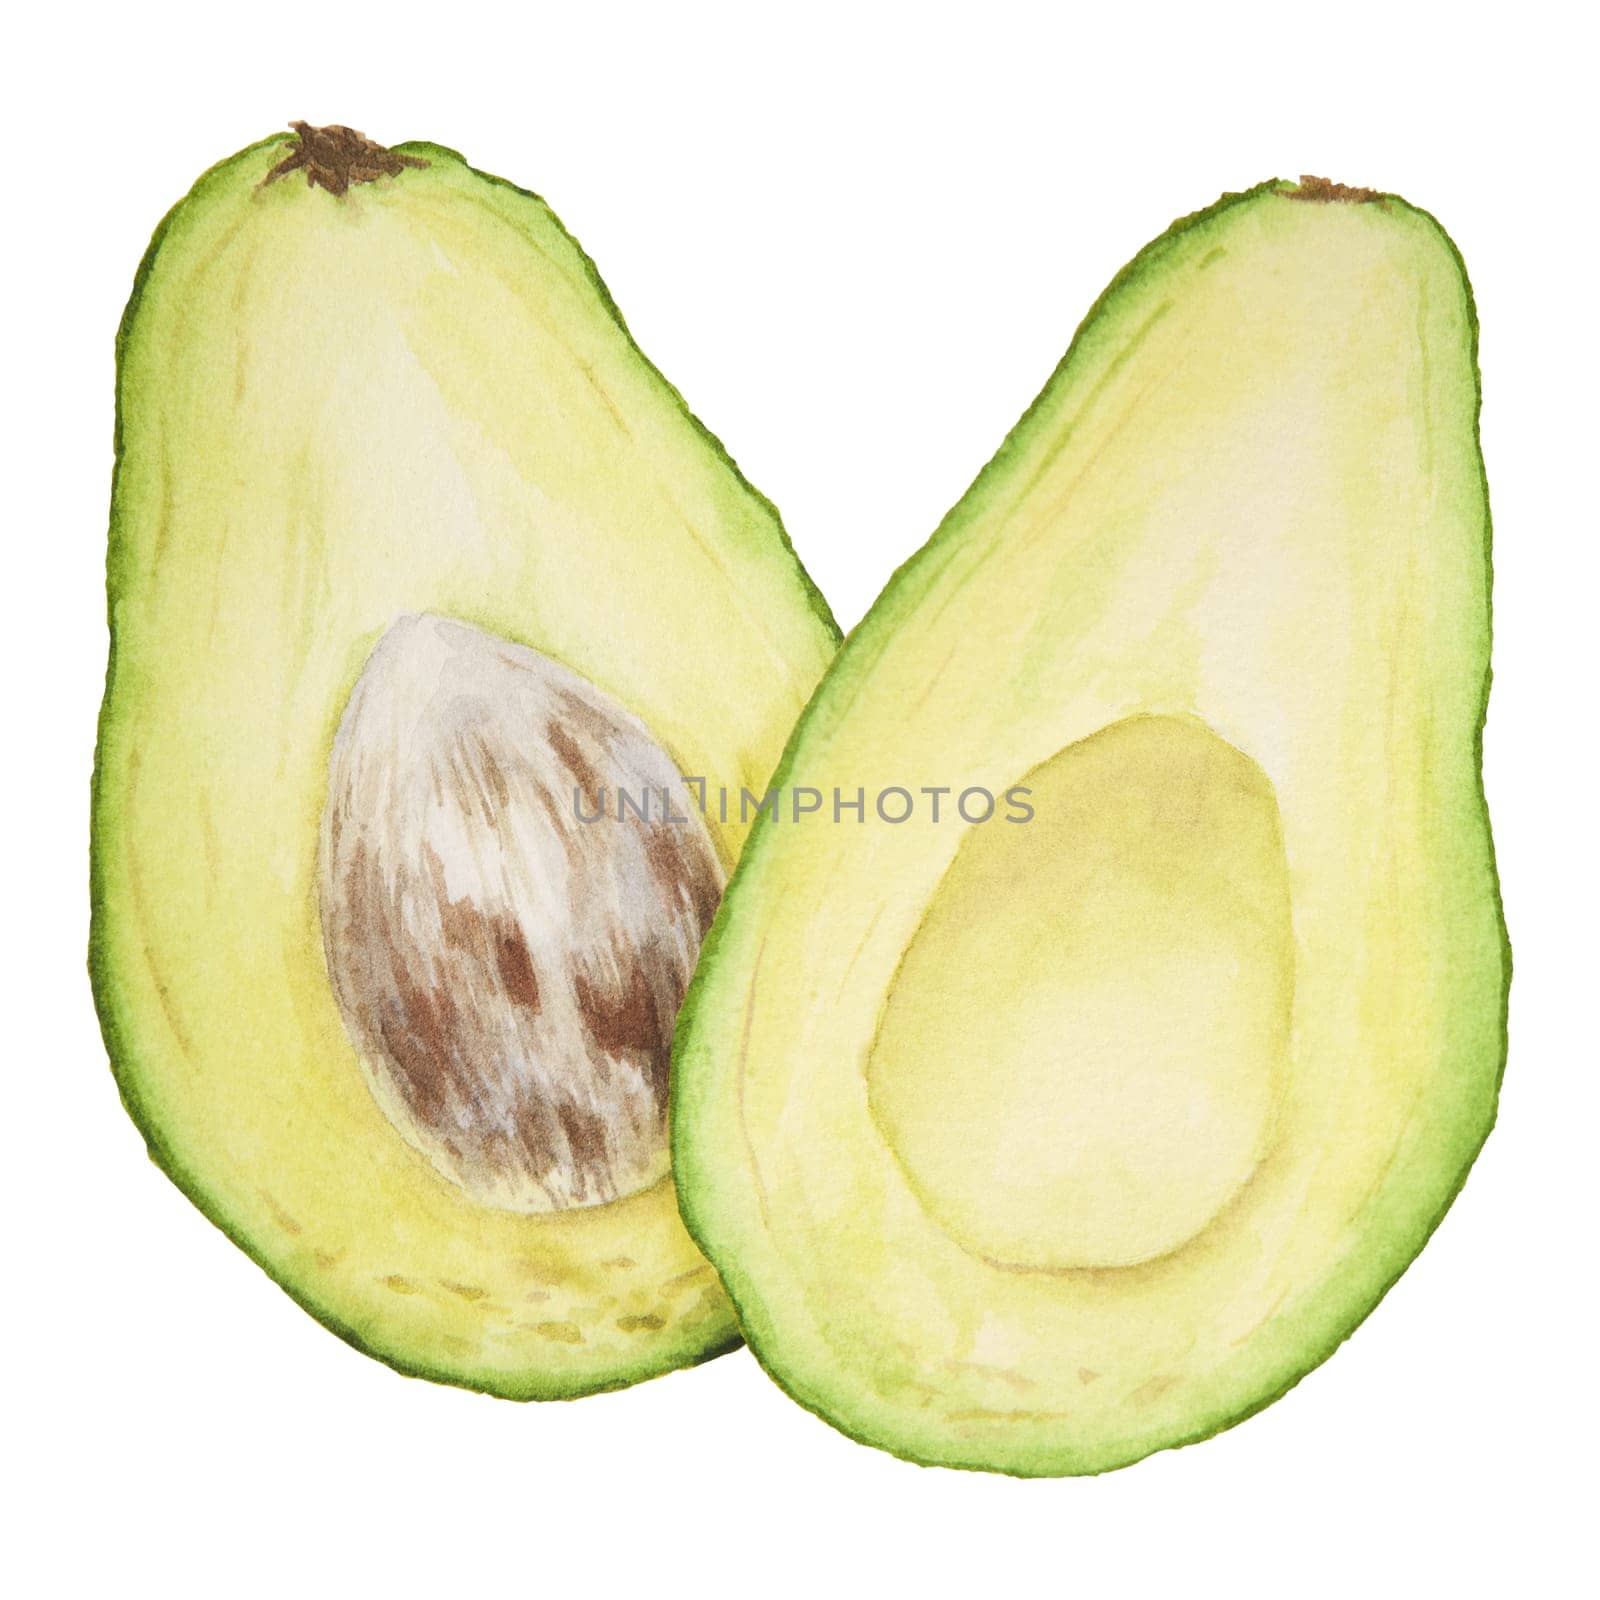 Avocado halves watercolor hand drawn realistic illustration. Green and fresh art of salad, sauce, guacamole, smoothie ingredient. For textile, menu, cards, paper, package, cooking books design